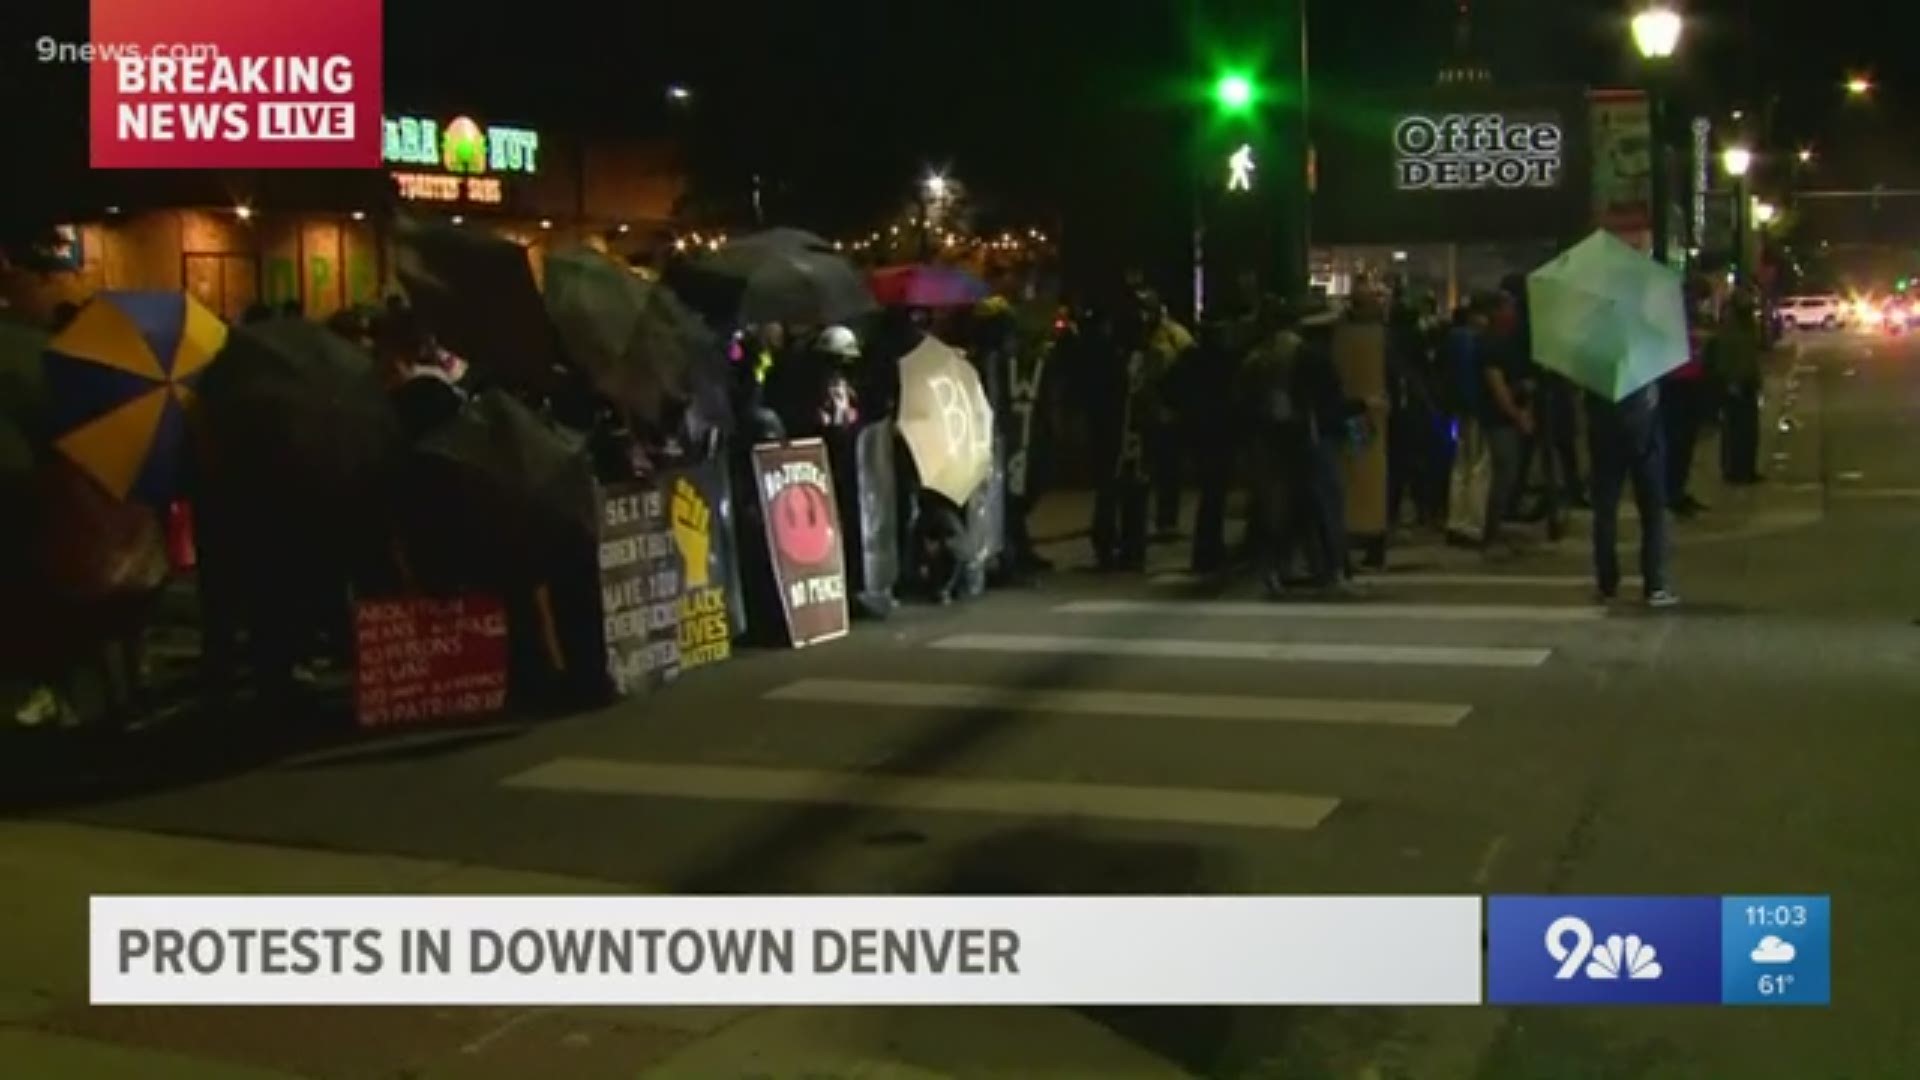 Police told a crowd to disperse while dressed in riot gear late Friday night.